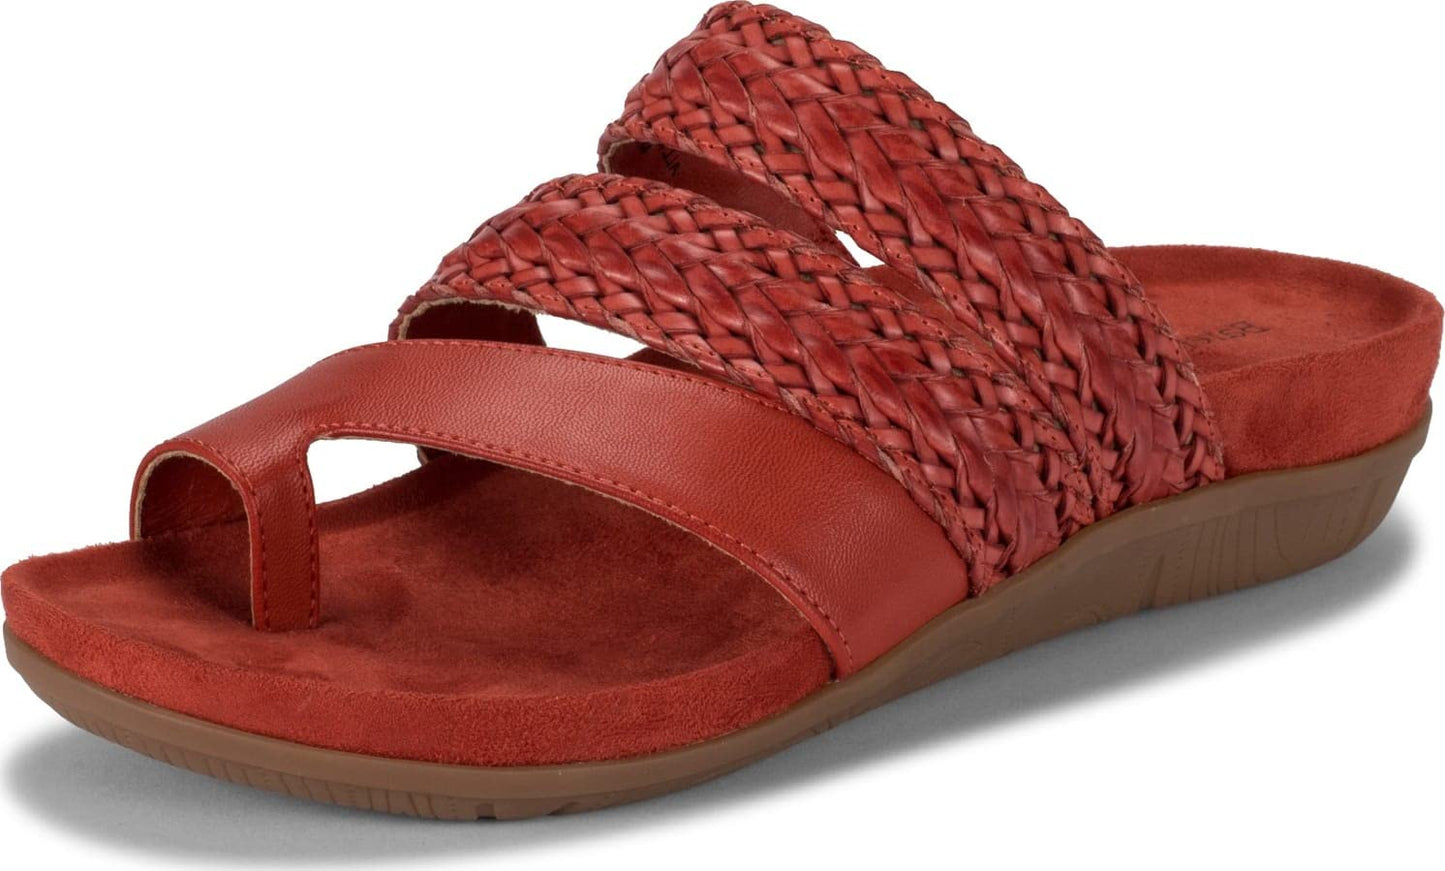 Sport Wedge Sandal With High Arch Support